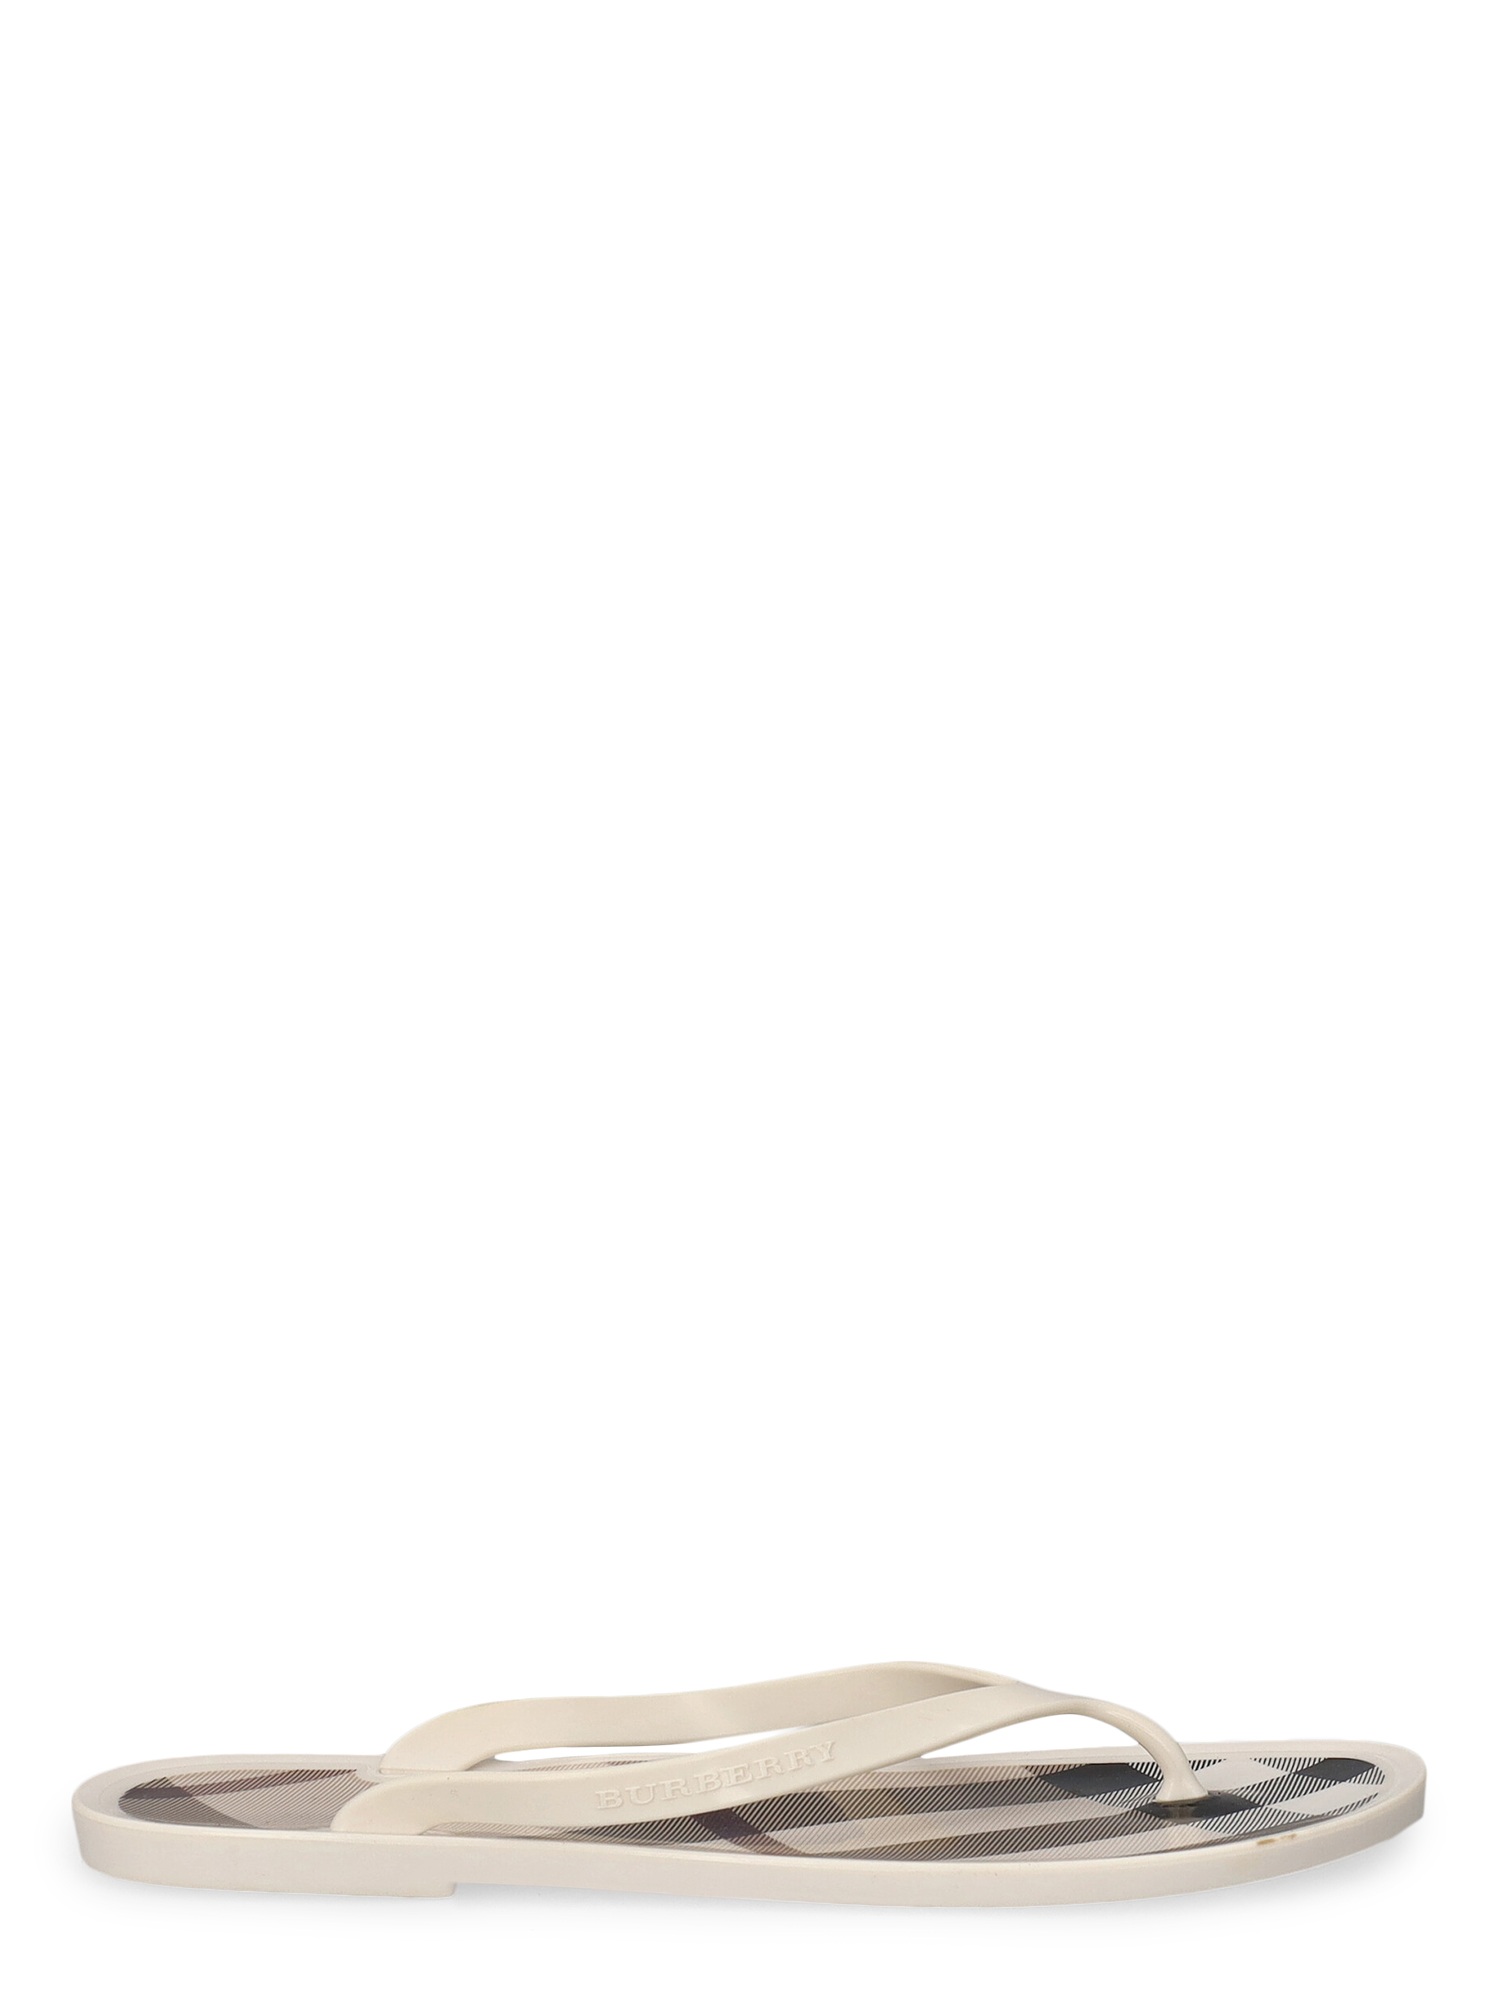 Pre-owned Burberry Women's Flip-flops -  - In White Synthetic Fibers